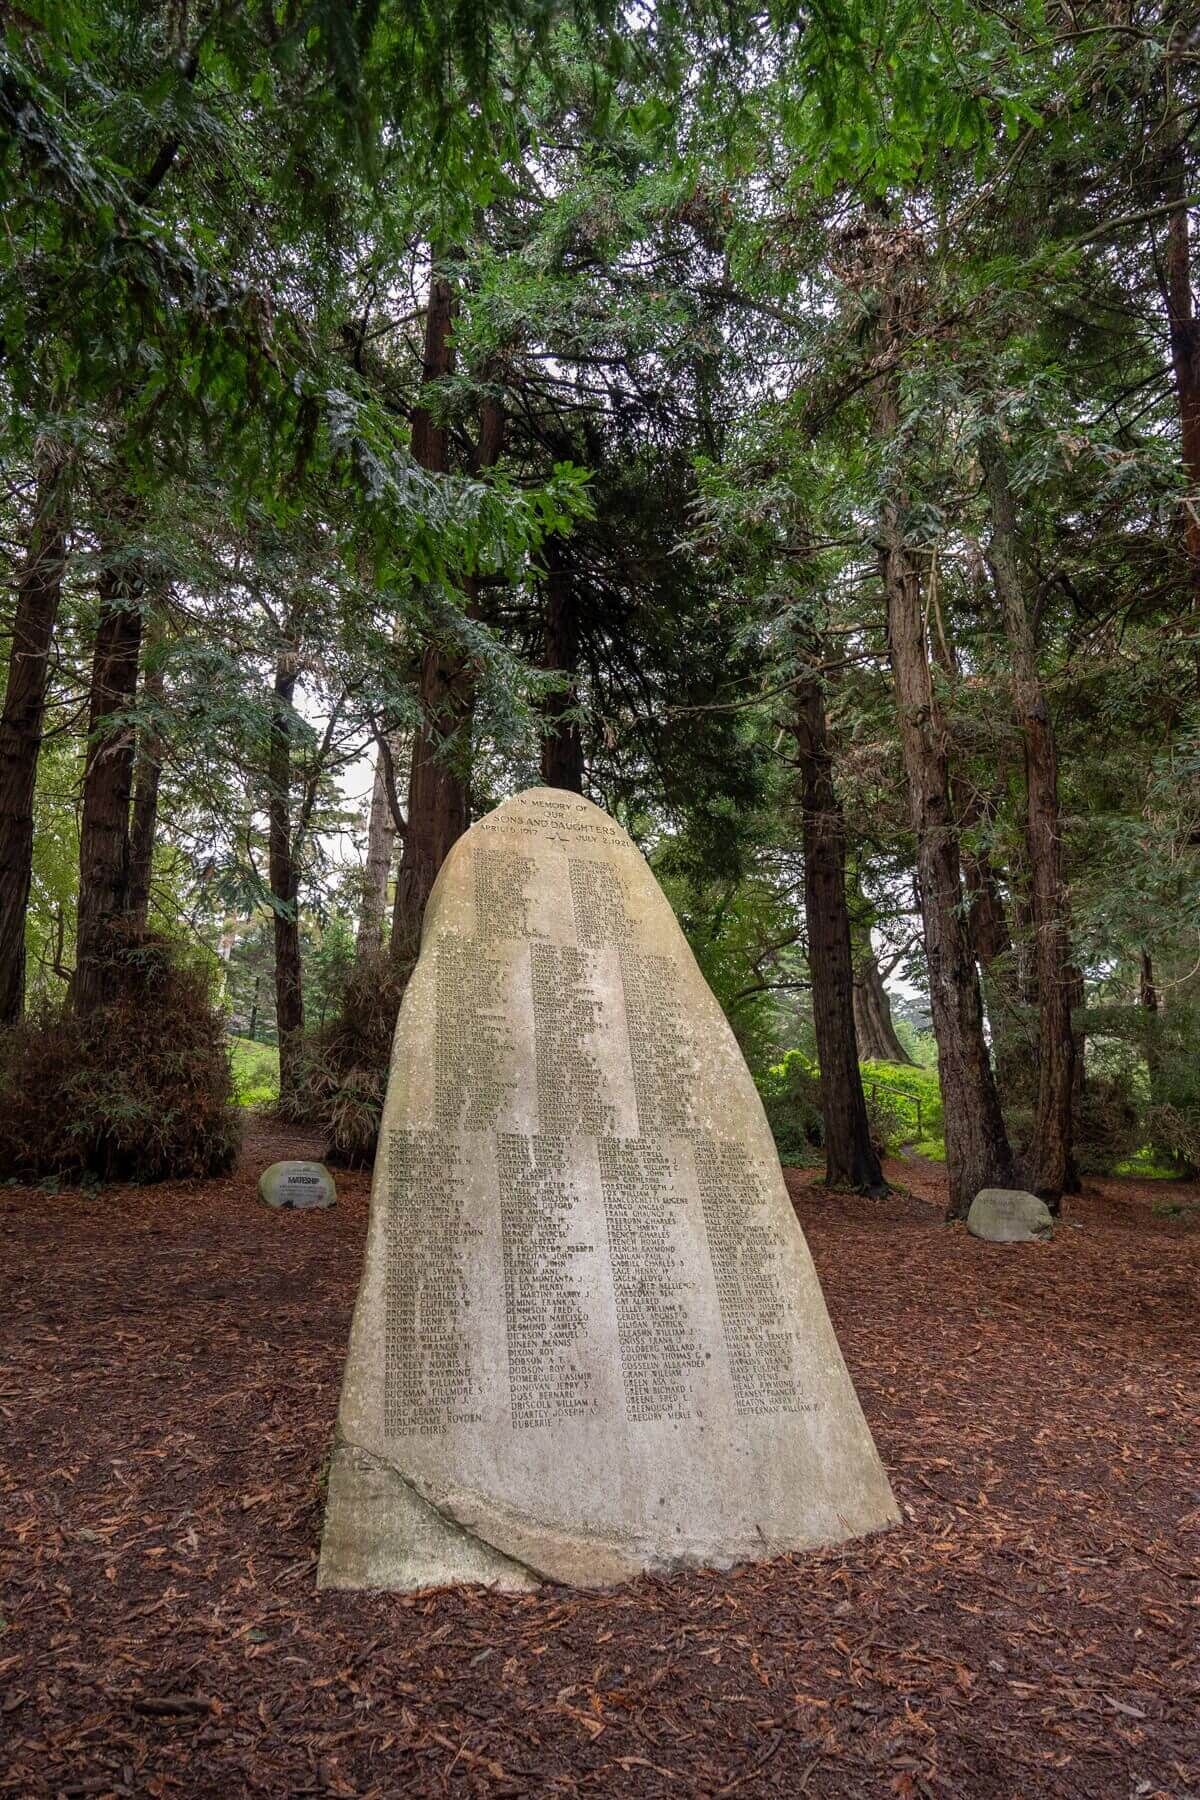 A stone in the Heroes Grove in Golden Gate Park that honors those who died in WWI with their names written down